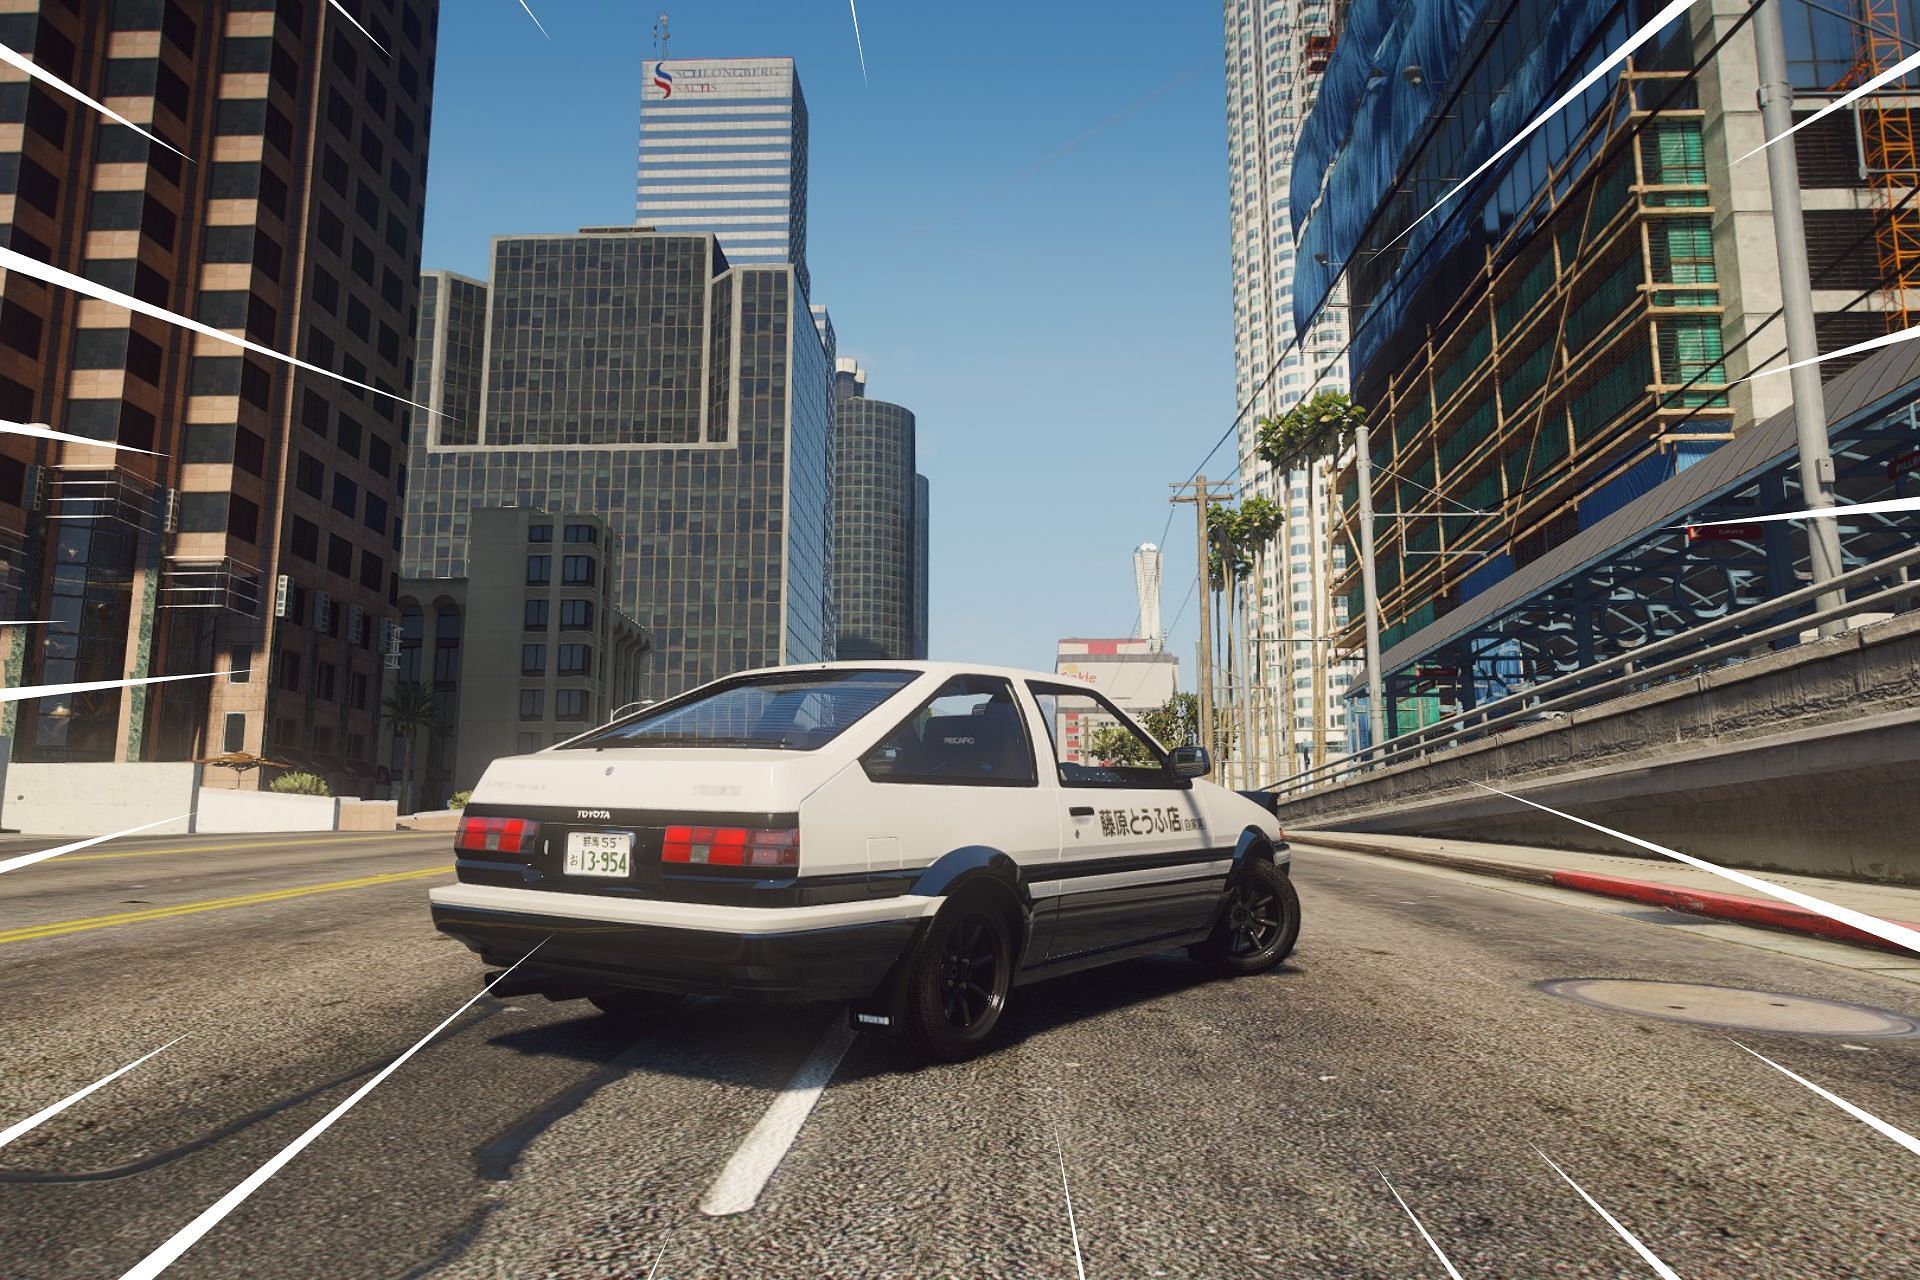 Players can use these mods to get tuner cars in GTA 5 (Images via Sportskeeda)